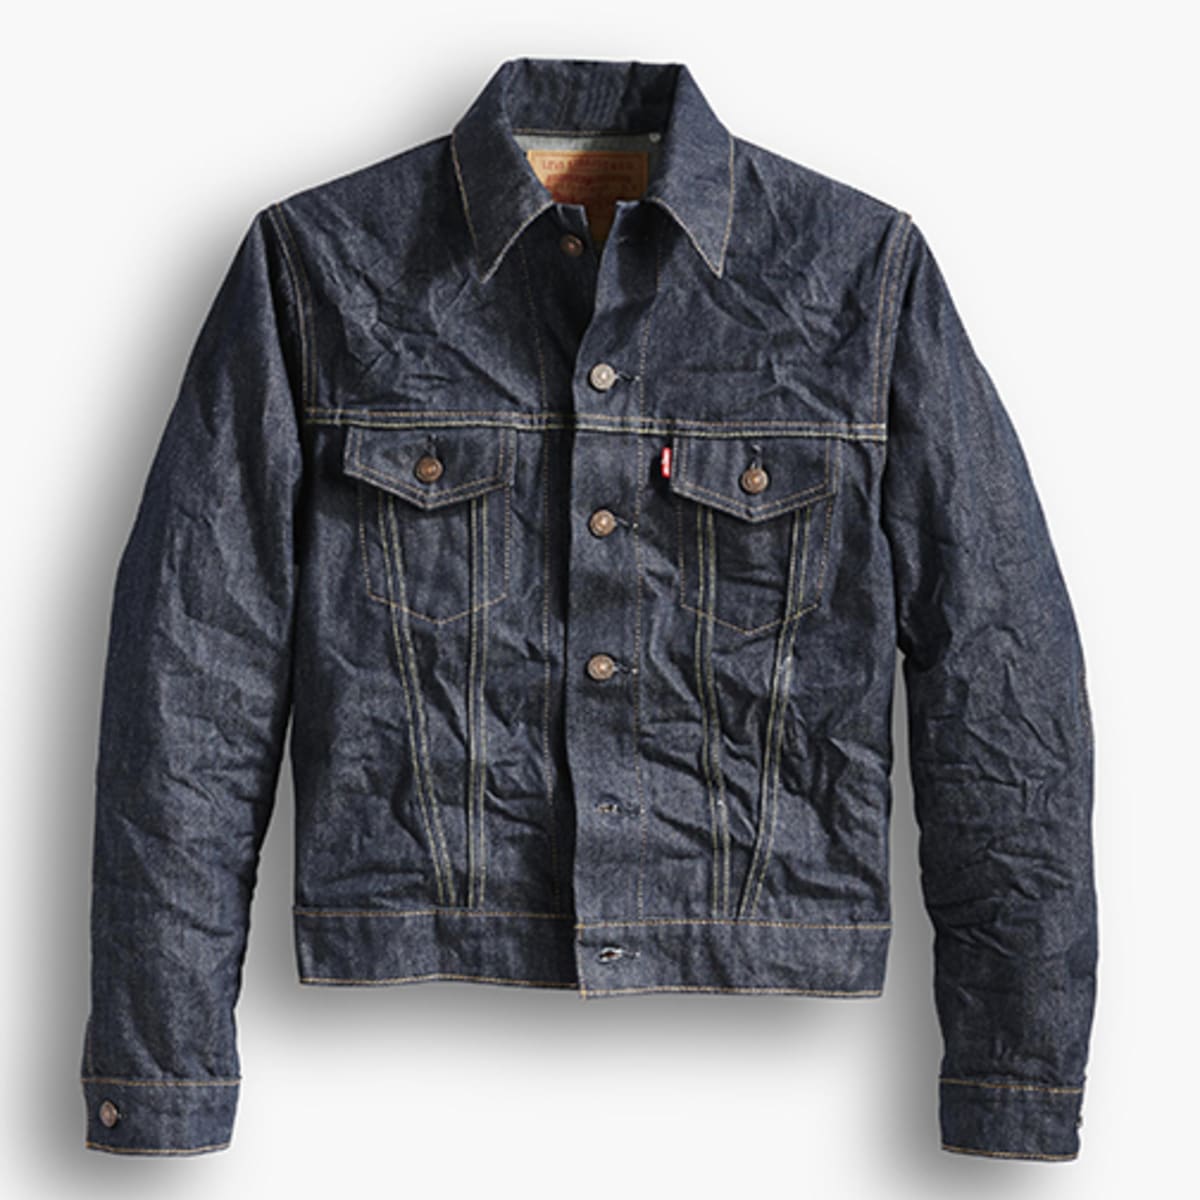 American-Made Denim Jackets From Levi's, Rag & Bone and More